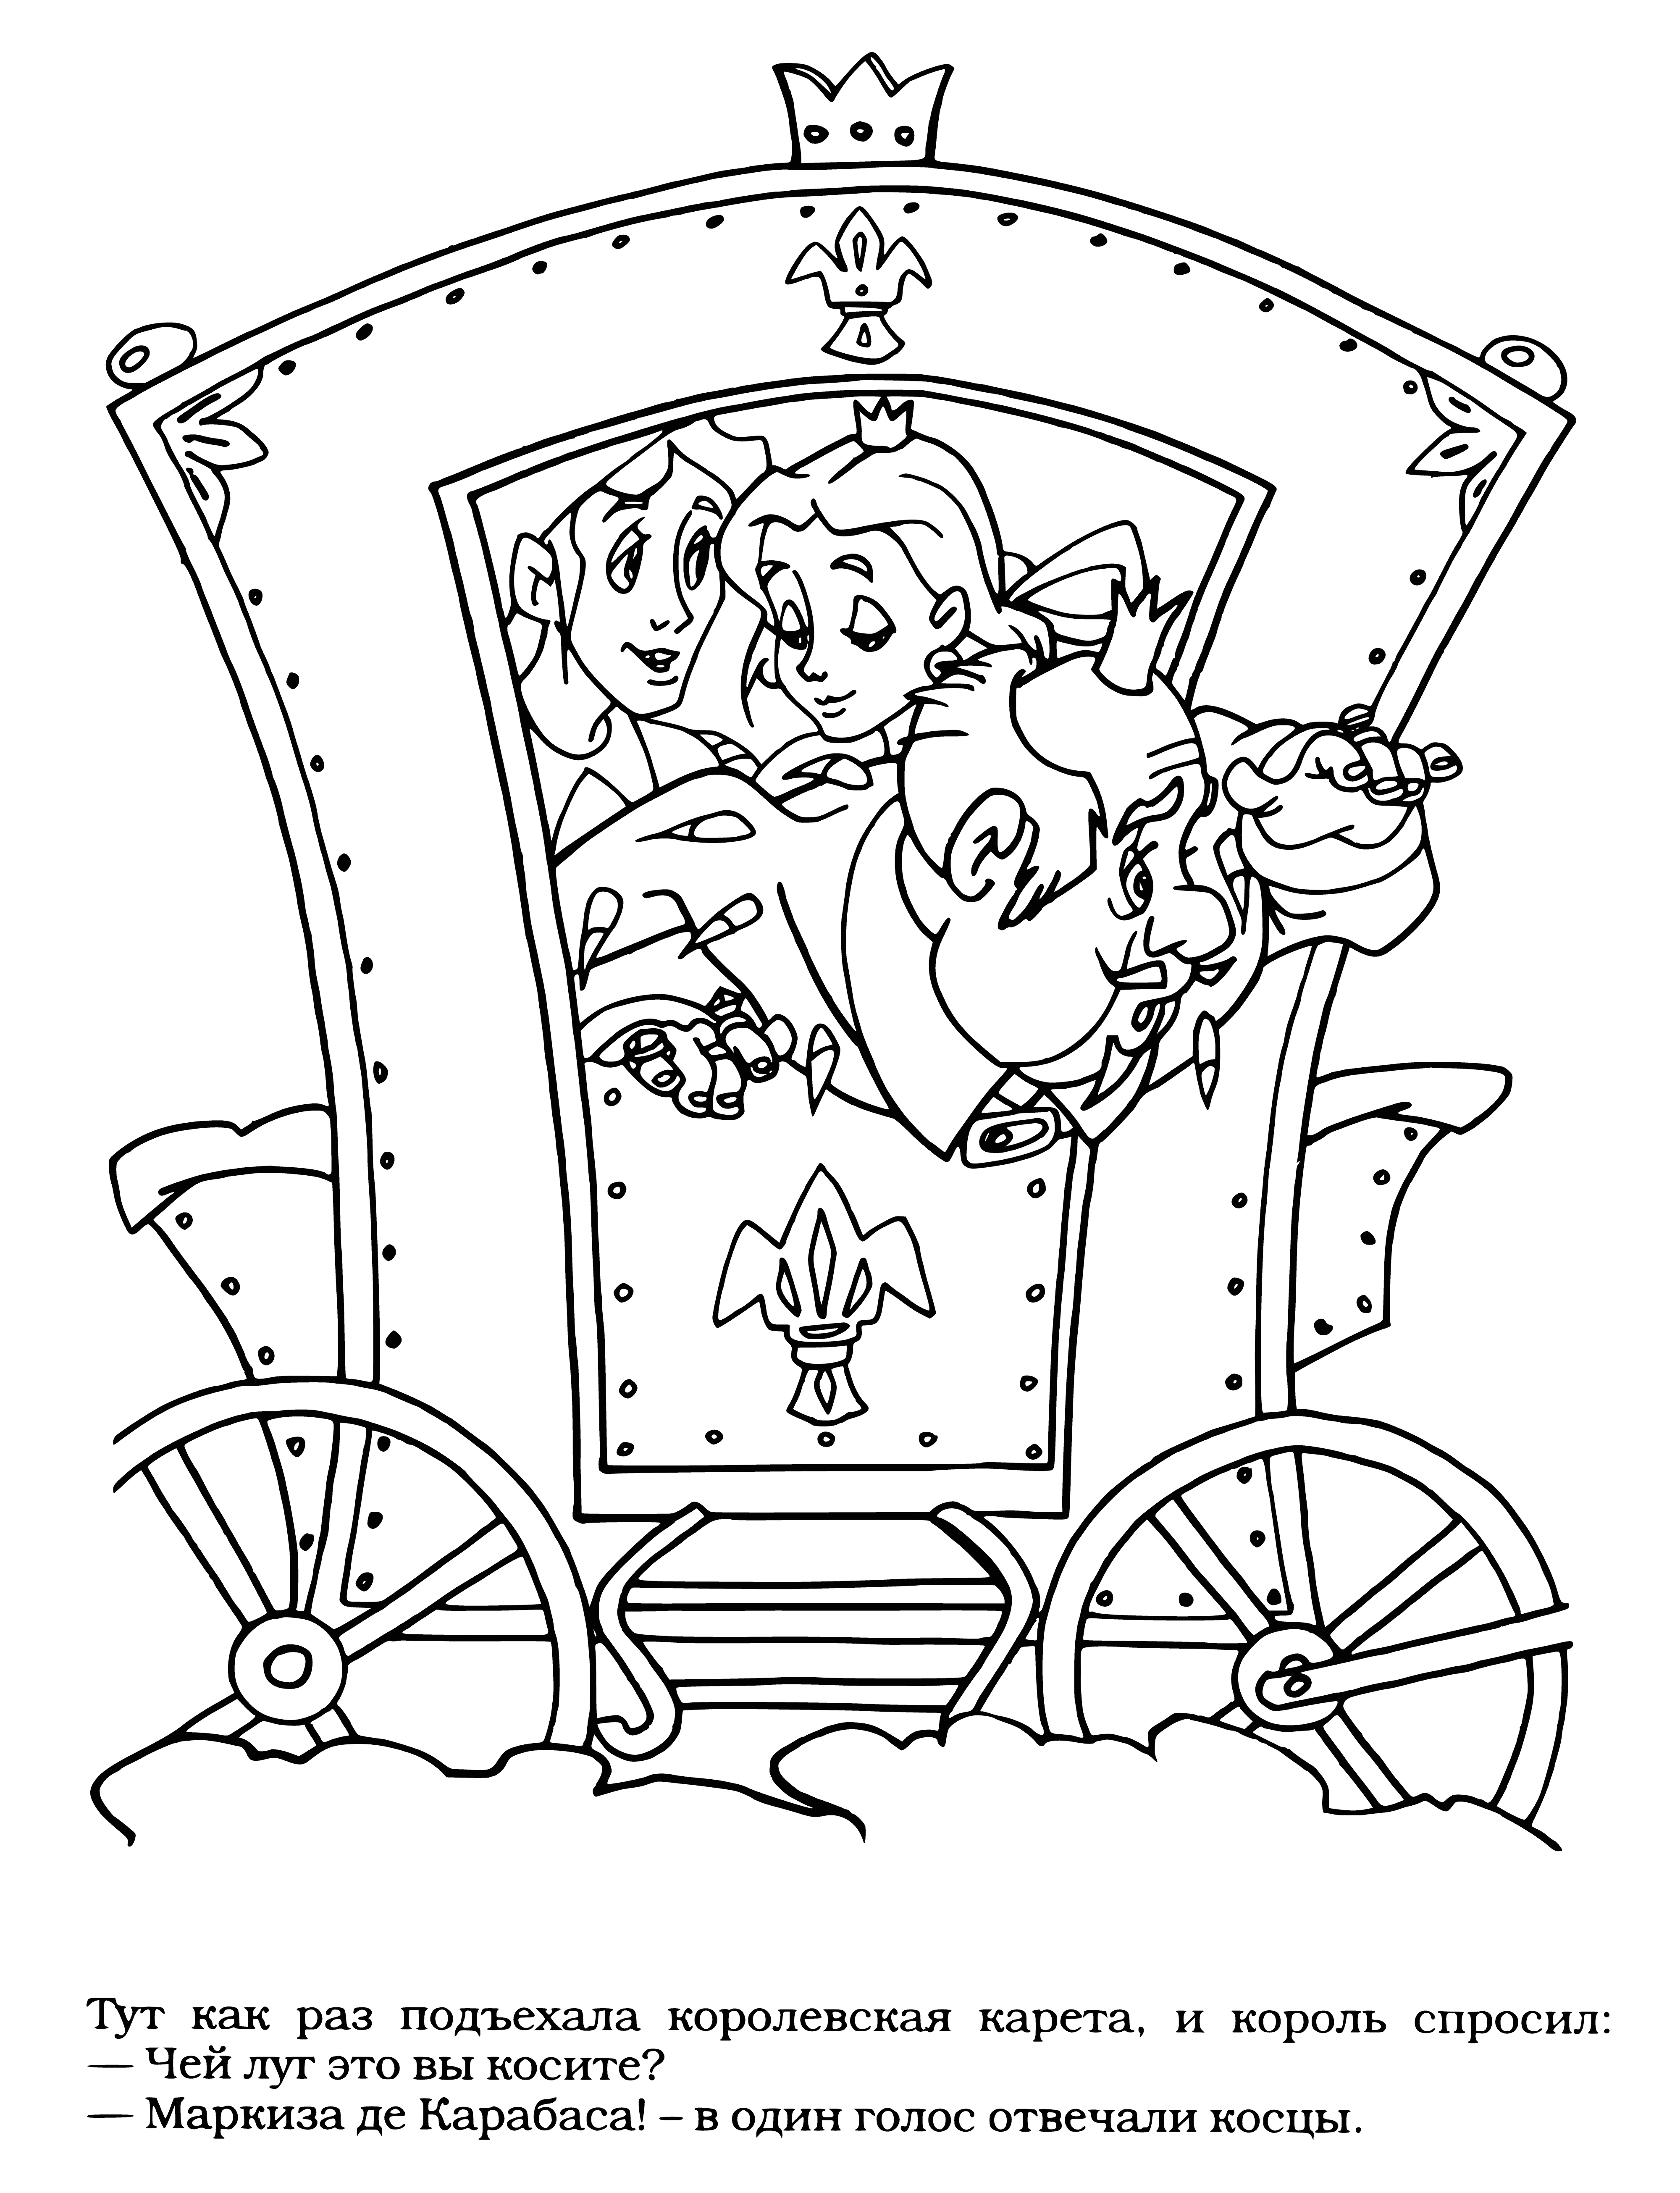 In the carriage coloring page